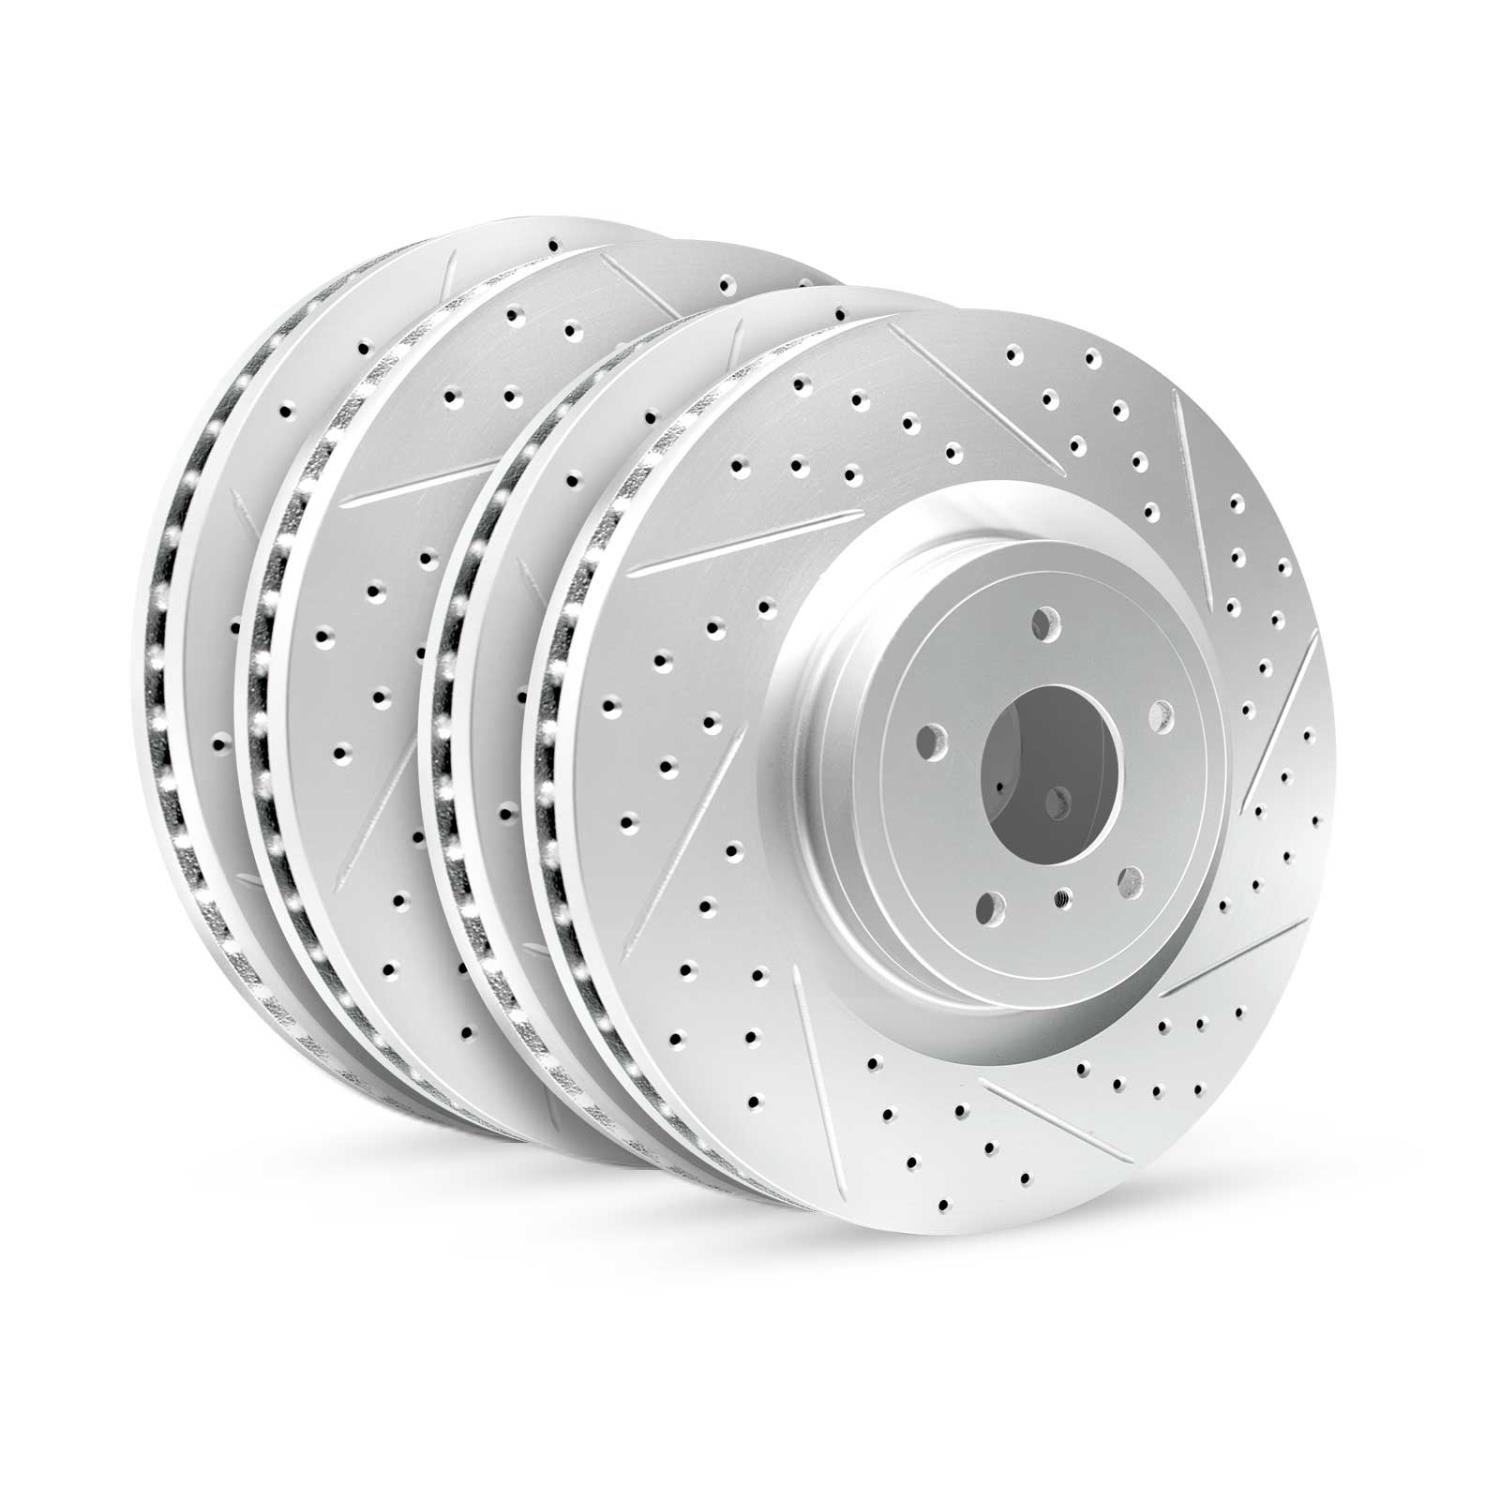 GEO-Carbon Drilled/Slotted Rotors, 2005-2009 Land Rover, Position: Front/Rear